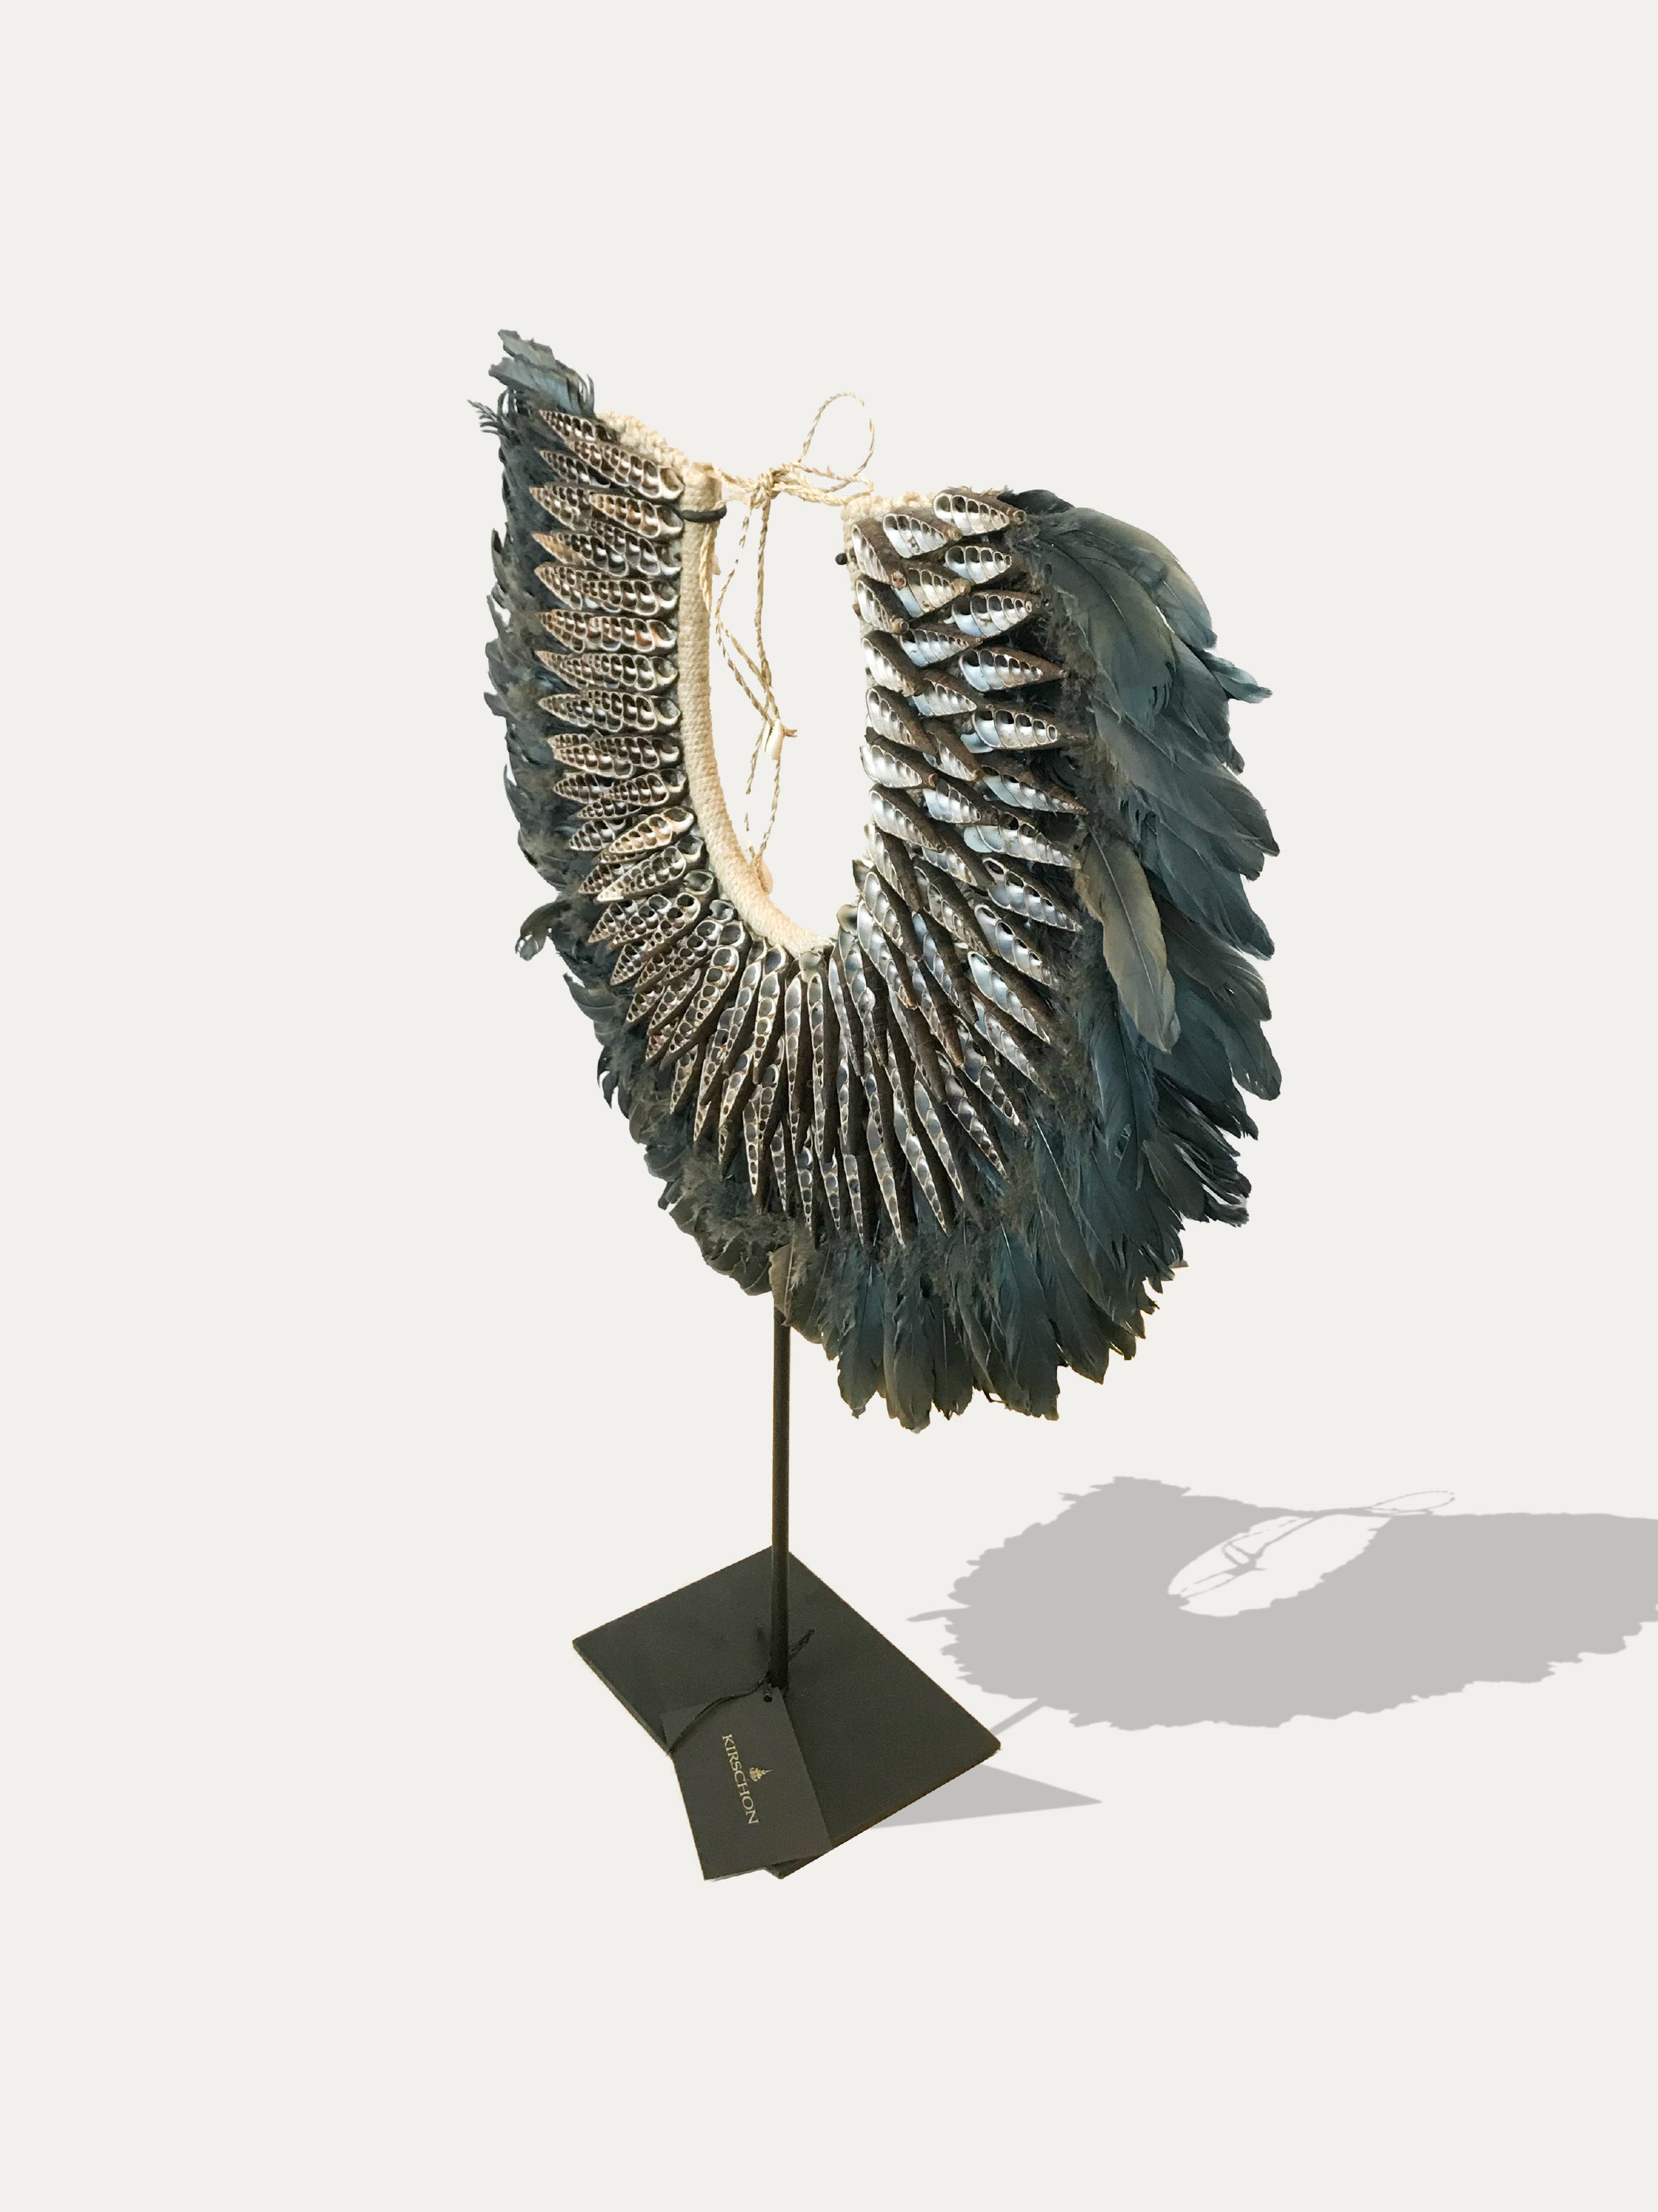 Spiral shell and feather necklace from Papua - Asian Art from Kirschon